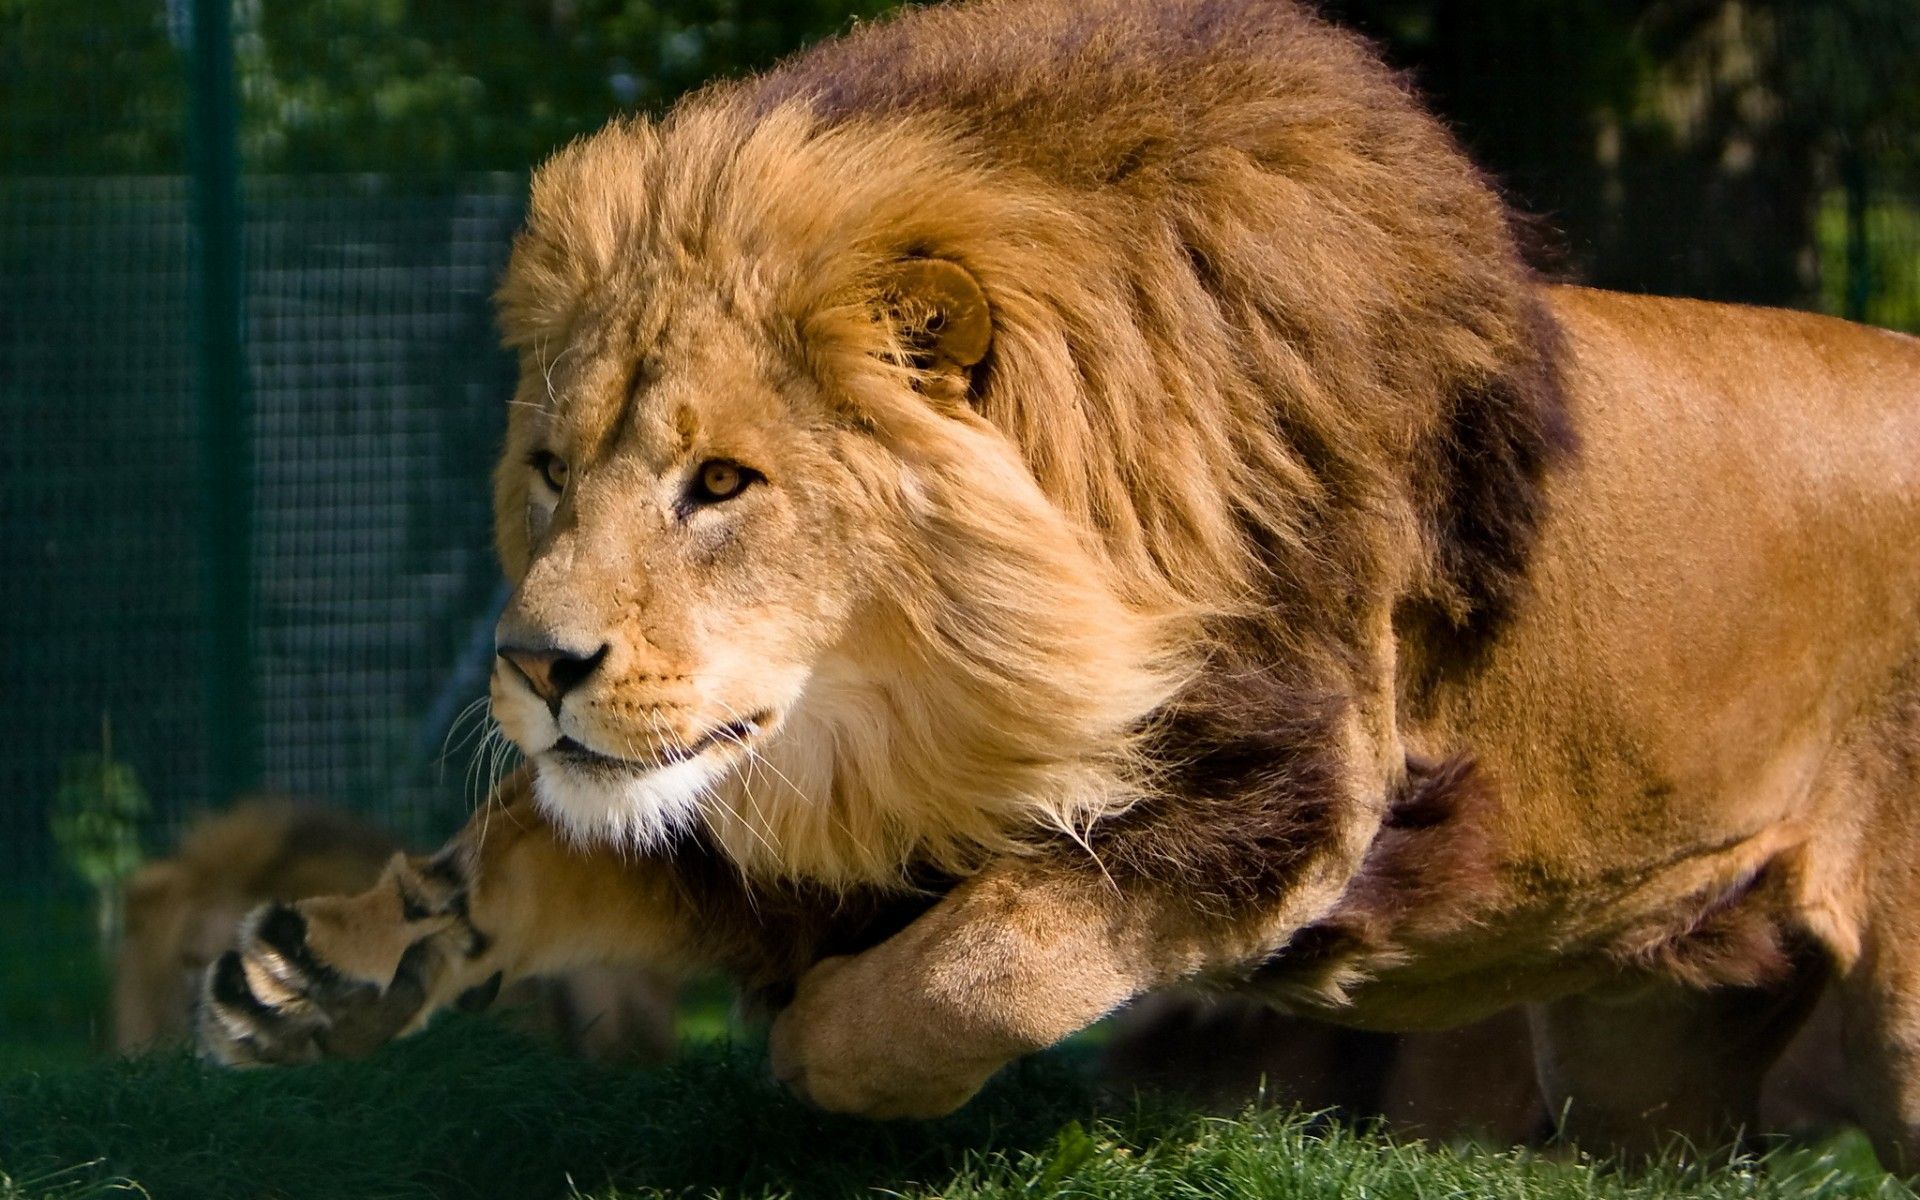 Angry lion wallpaper hd